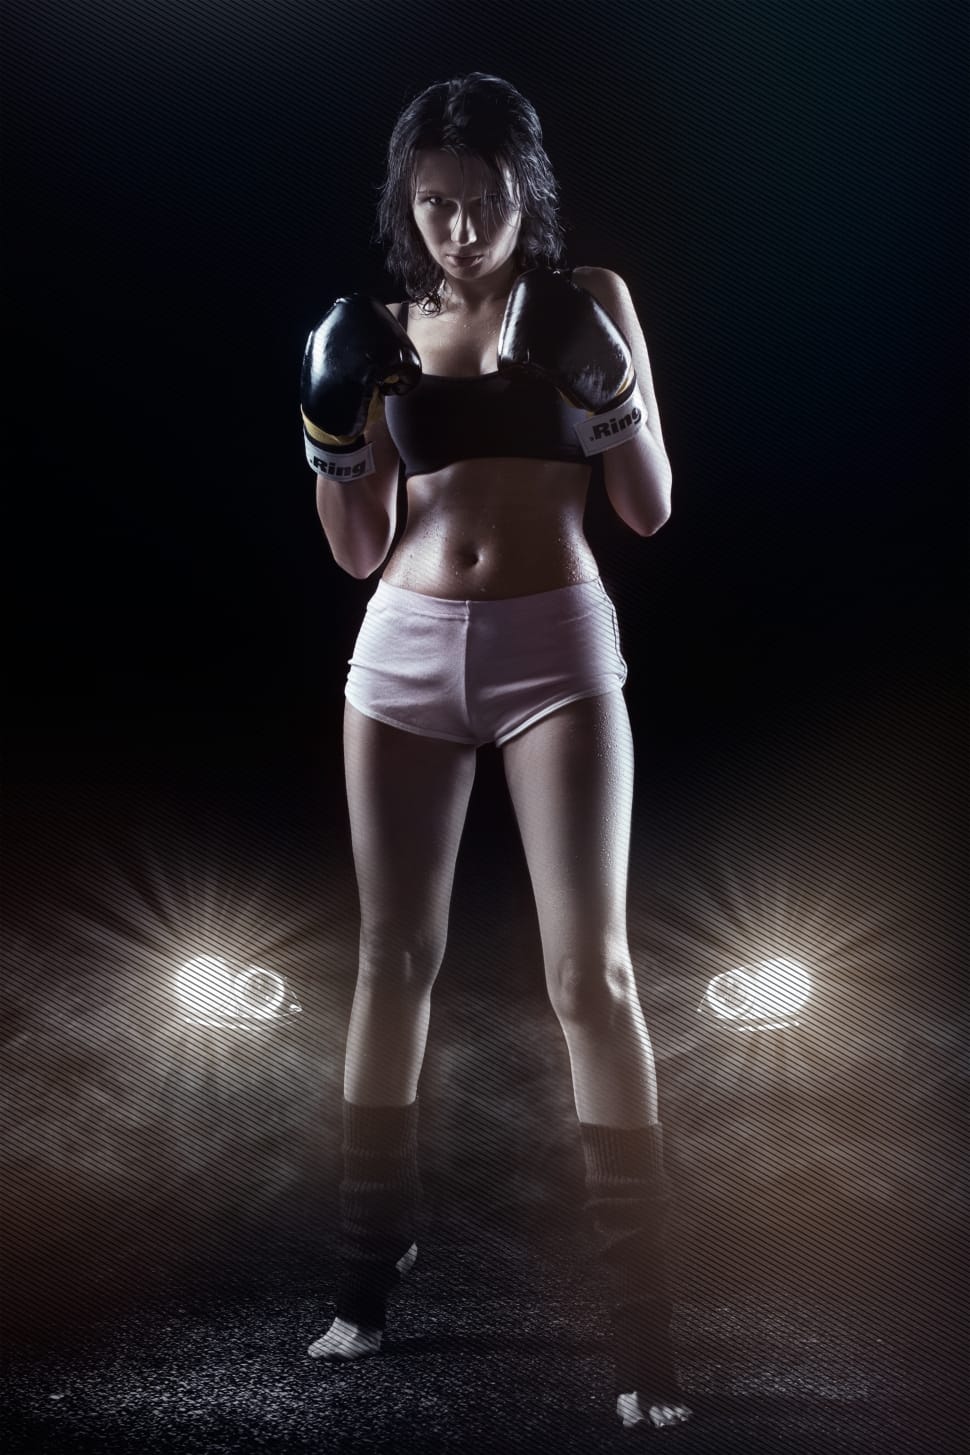 Woman wearing white and red sports bra and black boxing gloves